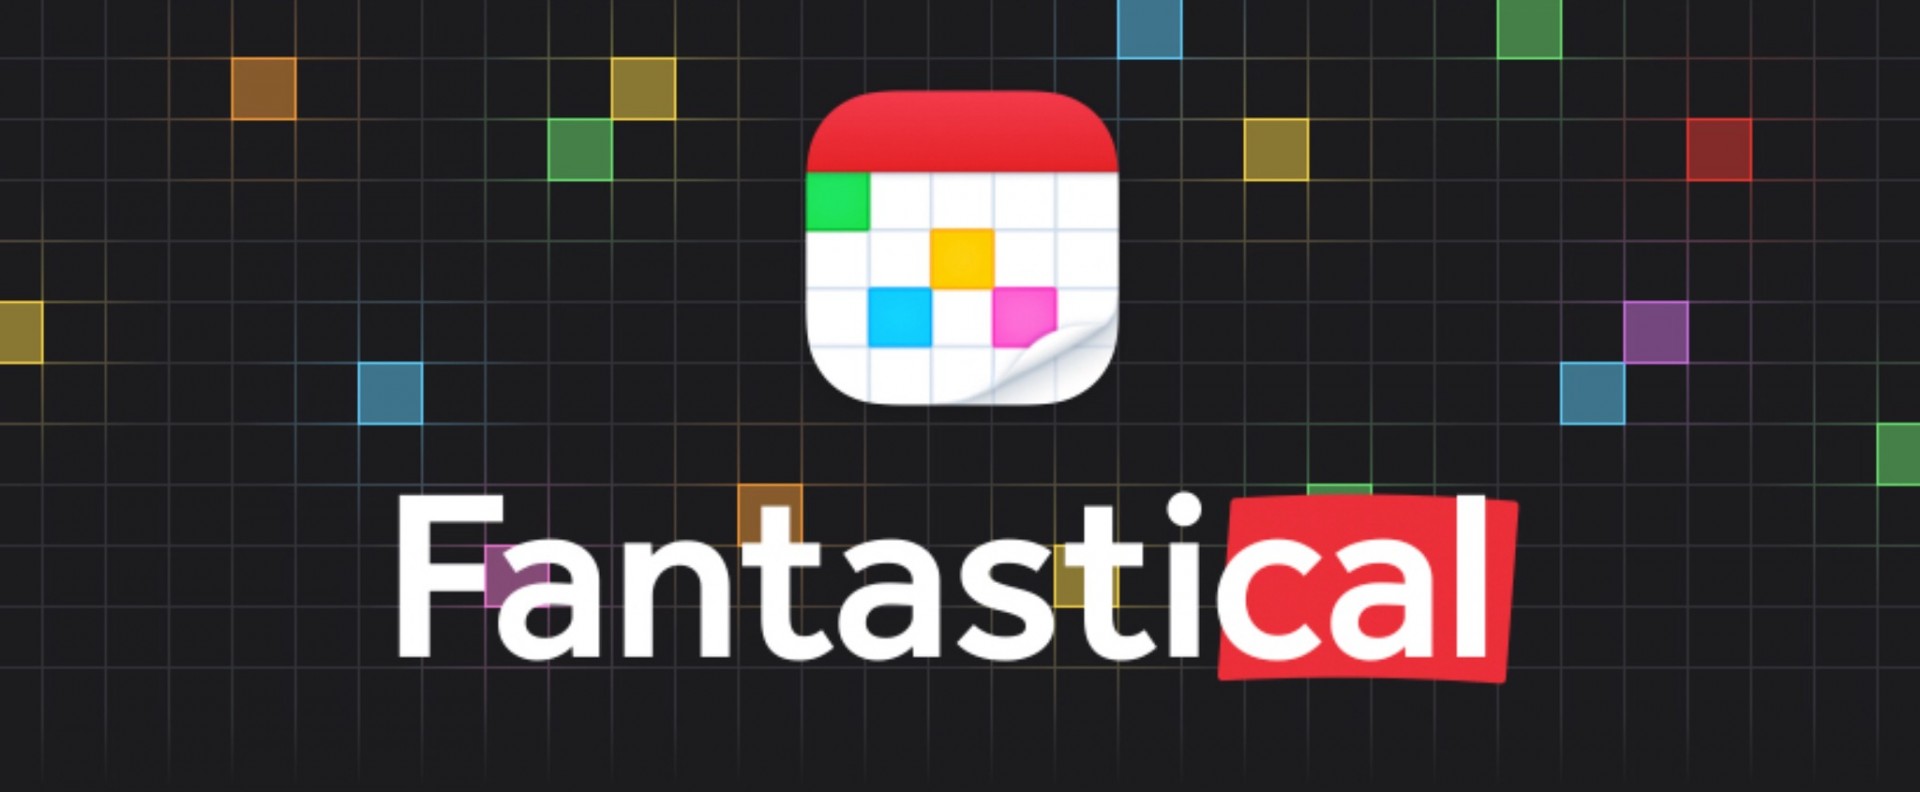 app-subscriptions-worth-paying-for-fantastical